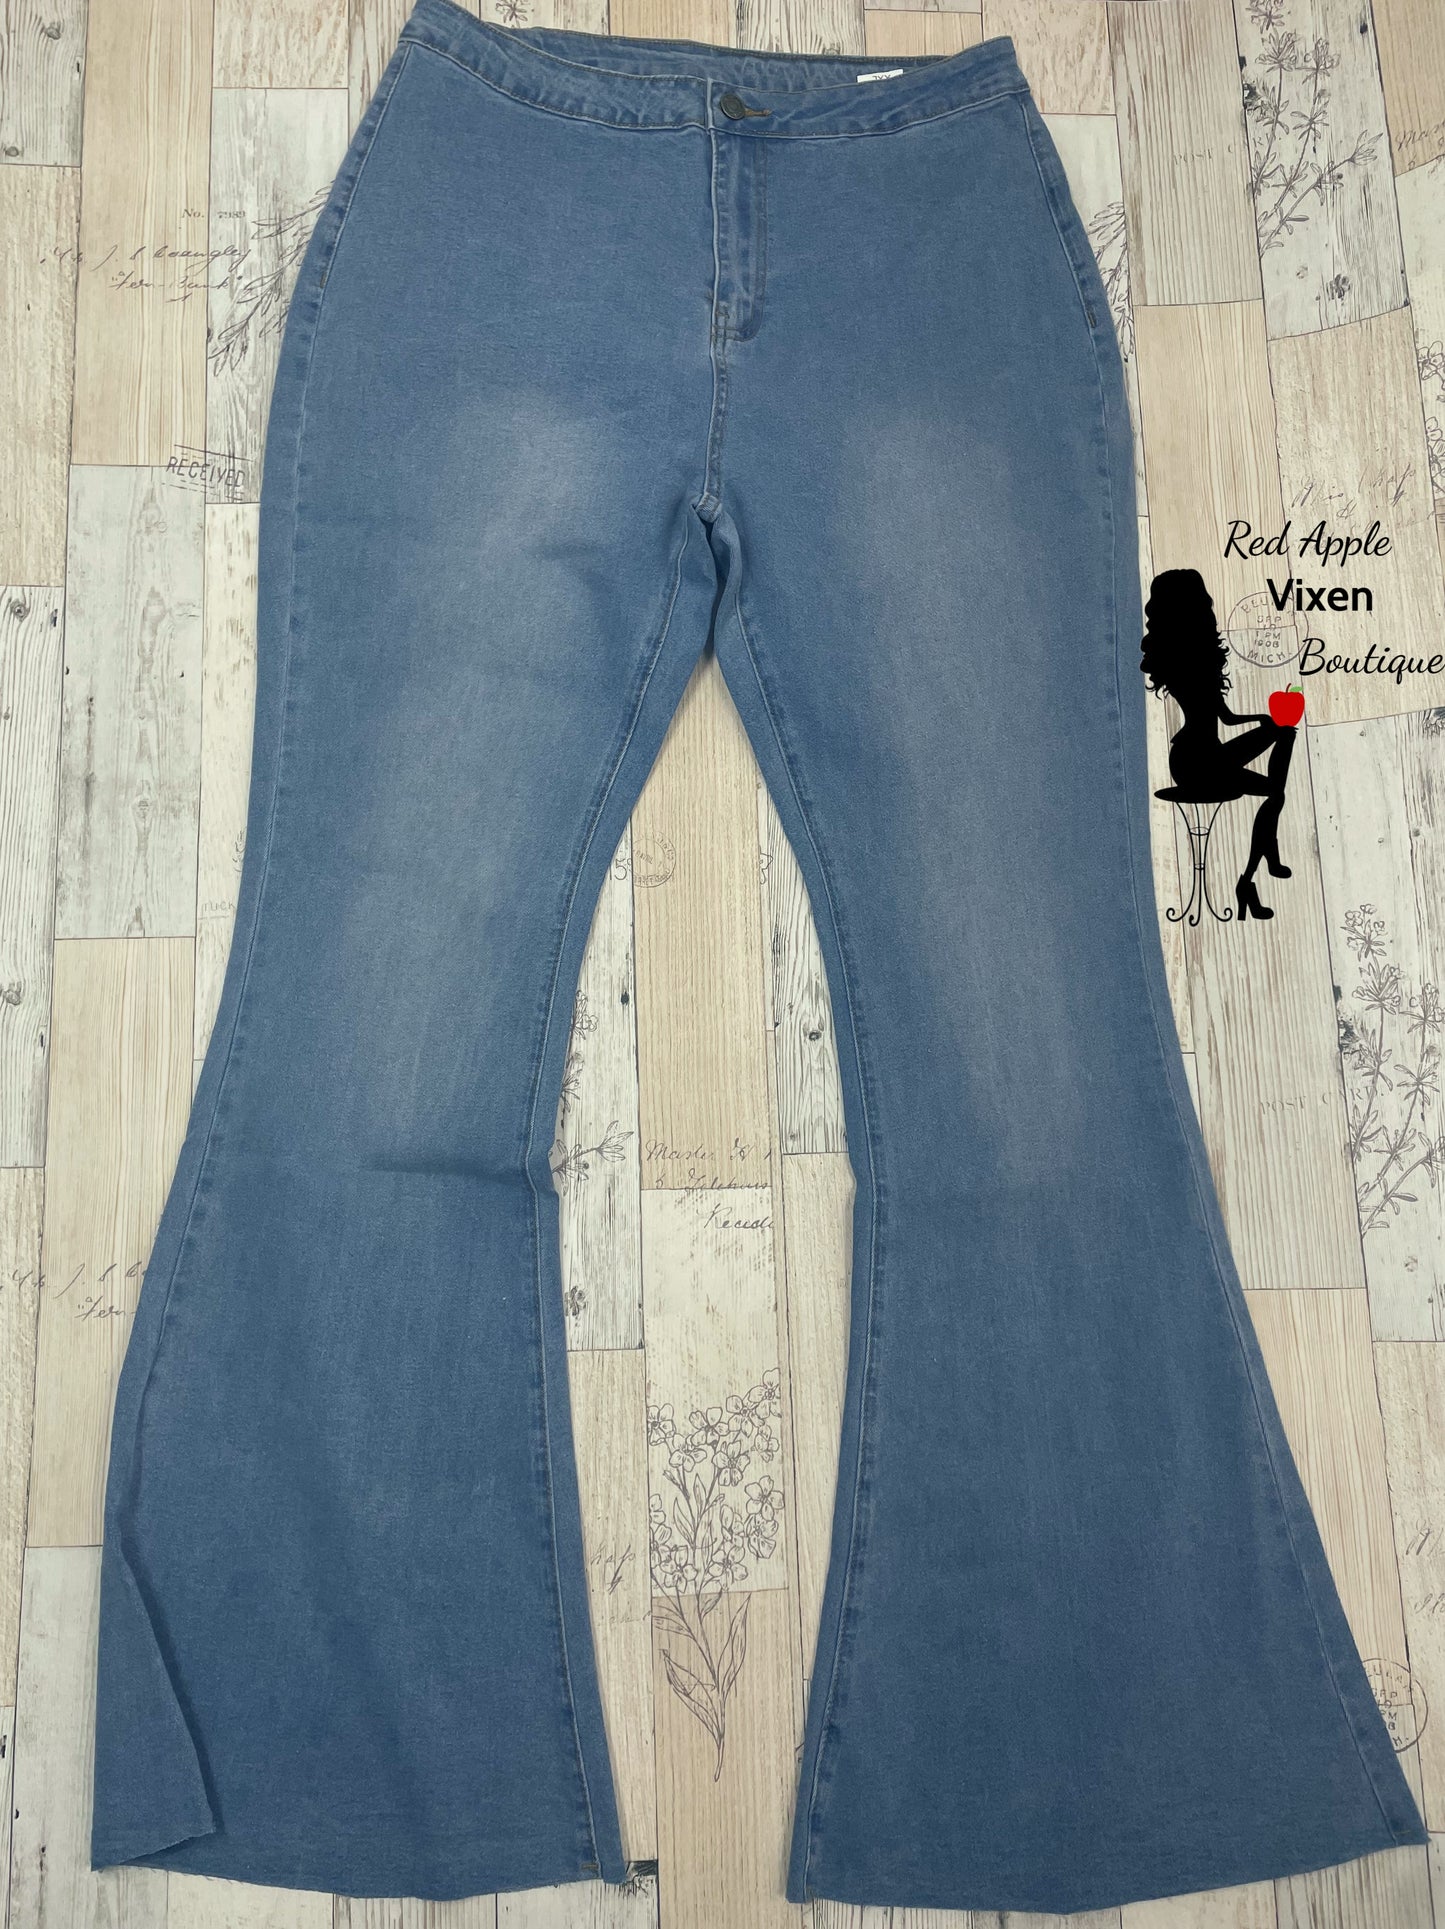 High Waisted Flare Jeans - Red Apple Vixen Boutique